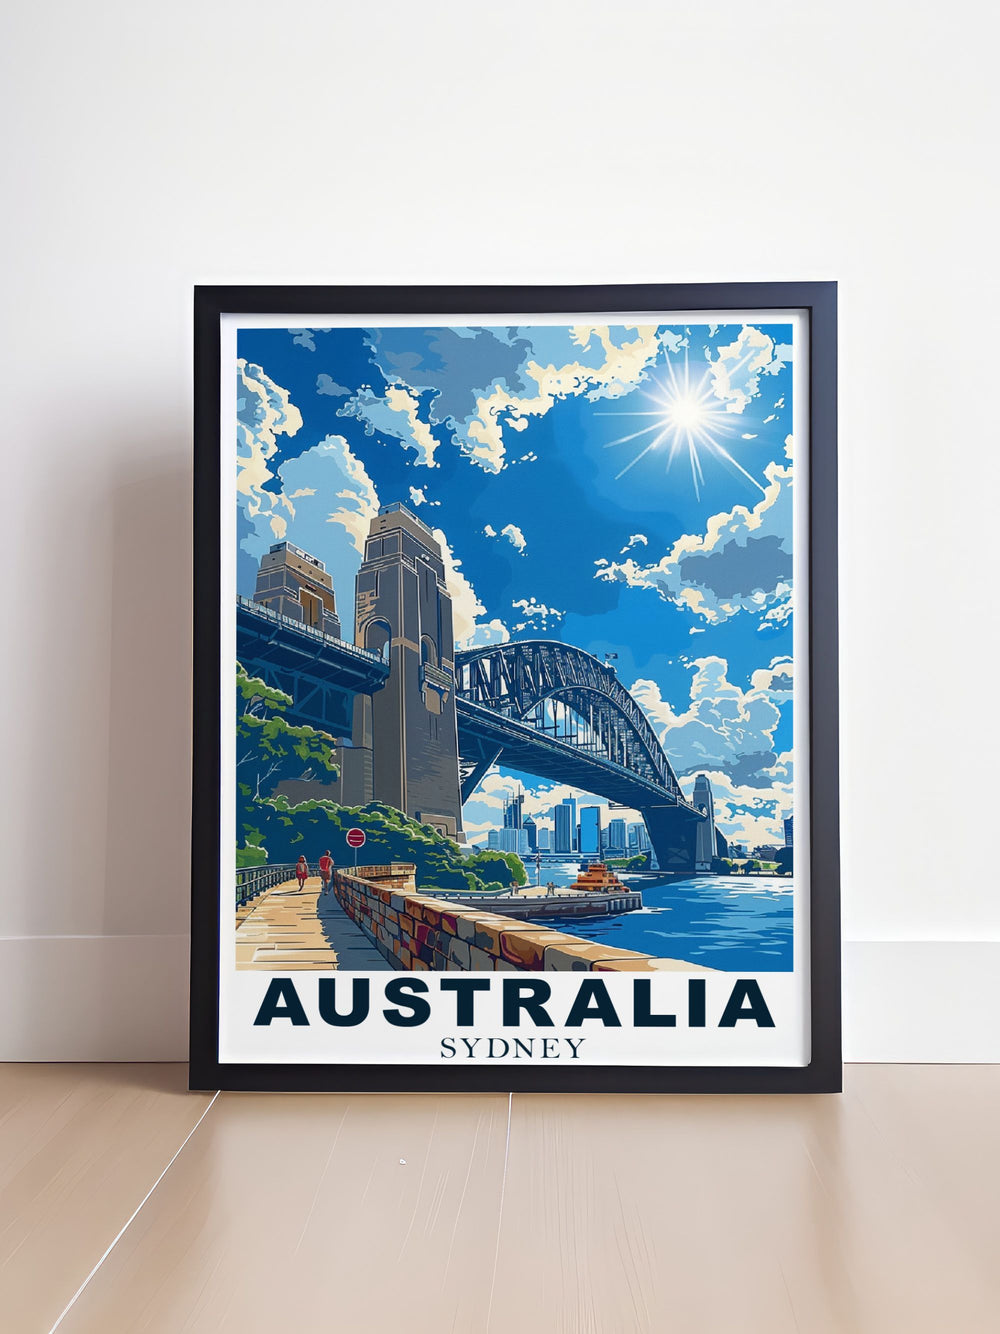 Experience the grandeur of Sydney Harbor Bridge with this art print, capturing the iconic arches and stunning harbor views, perfect for adding a touch of Australian elegance to your decor.